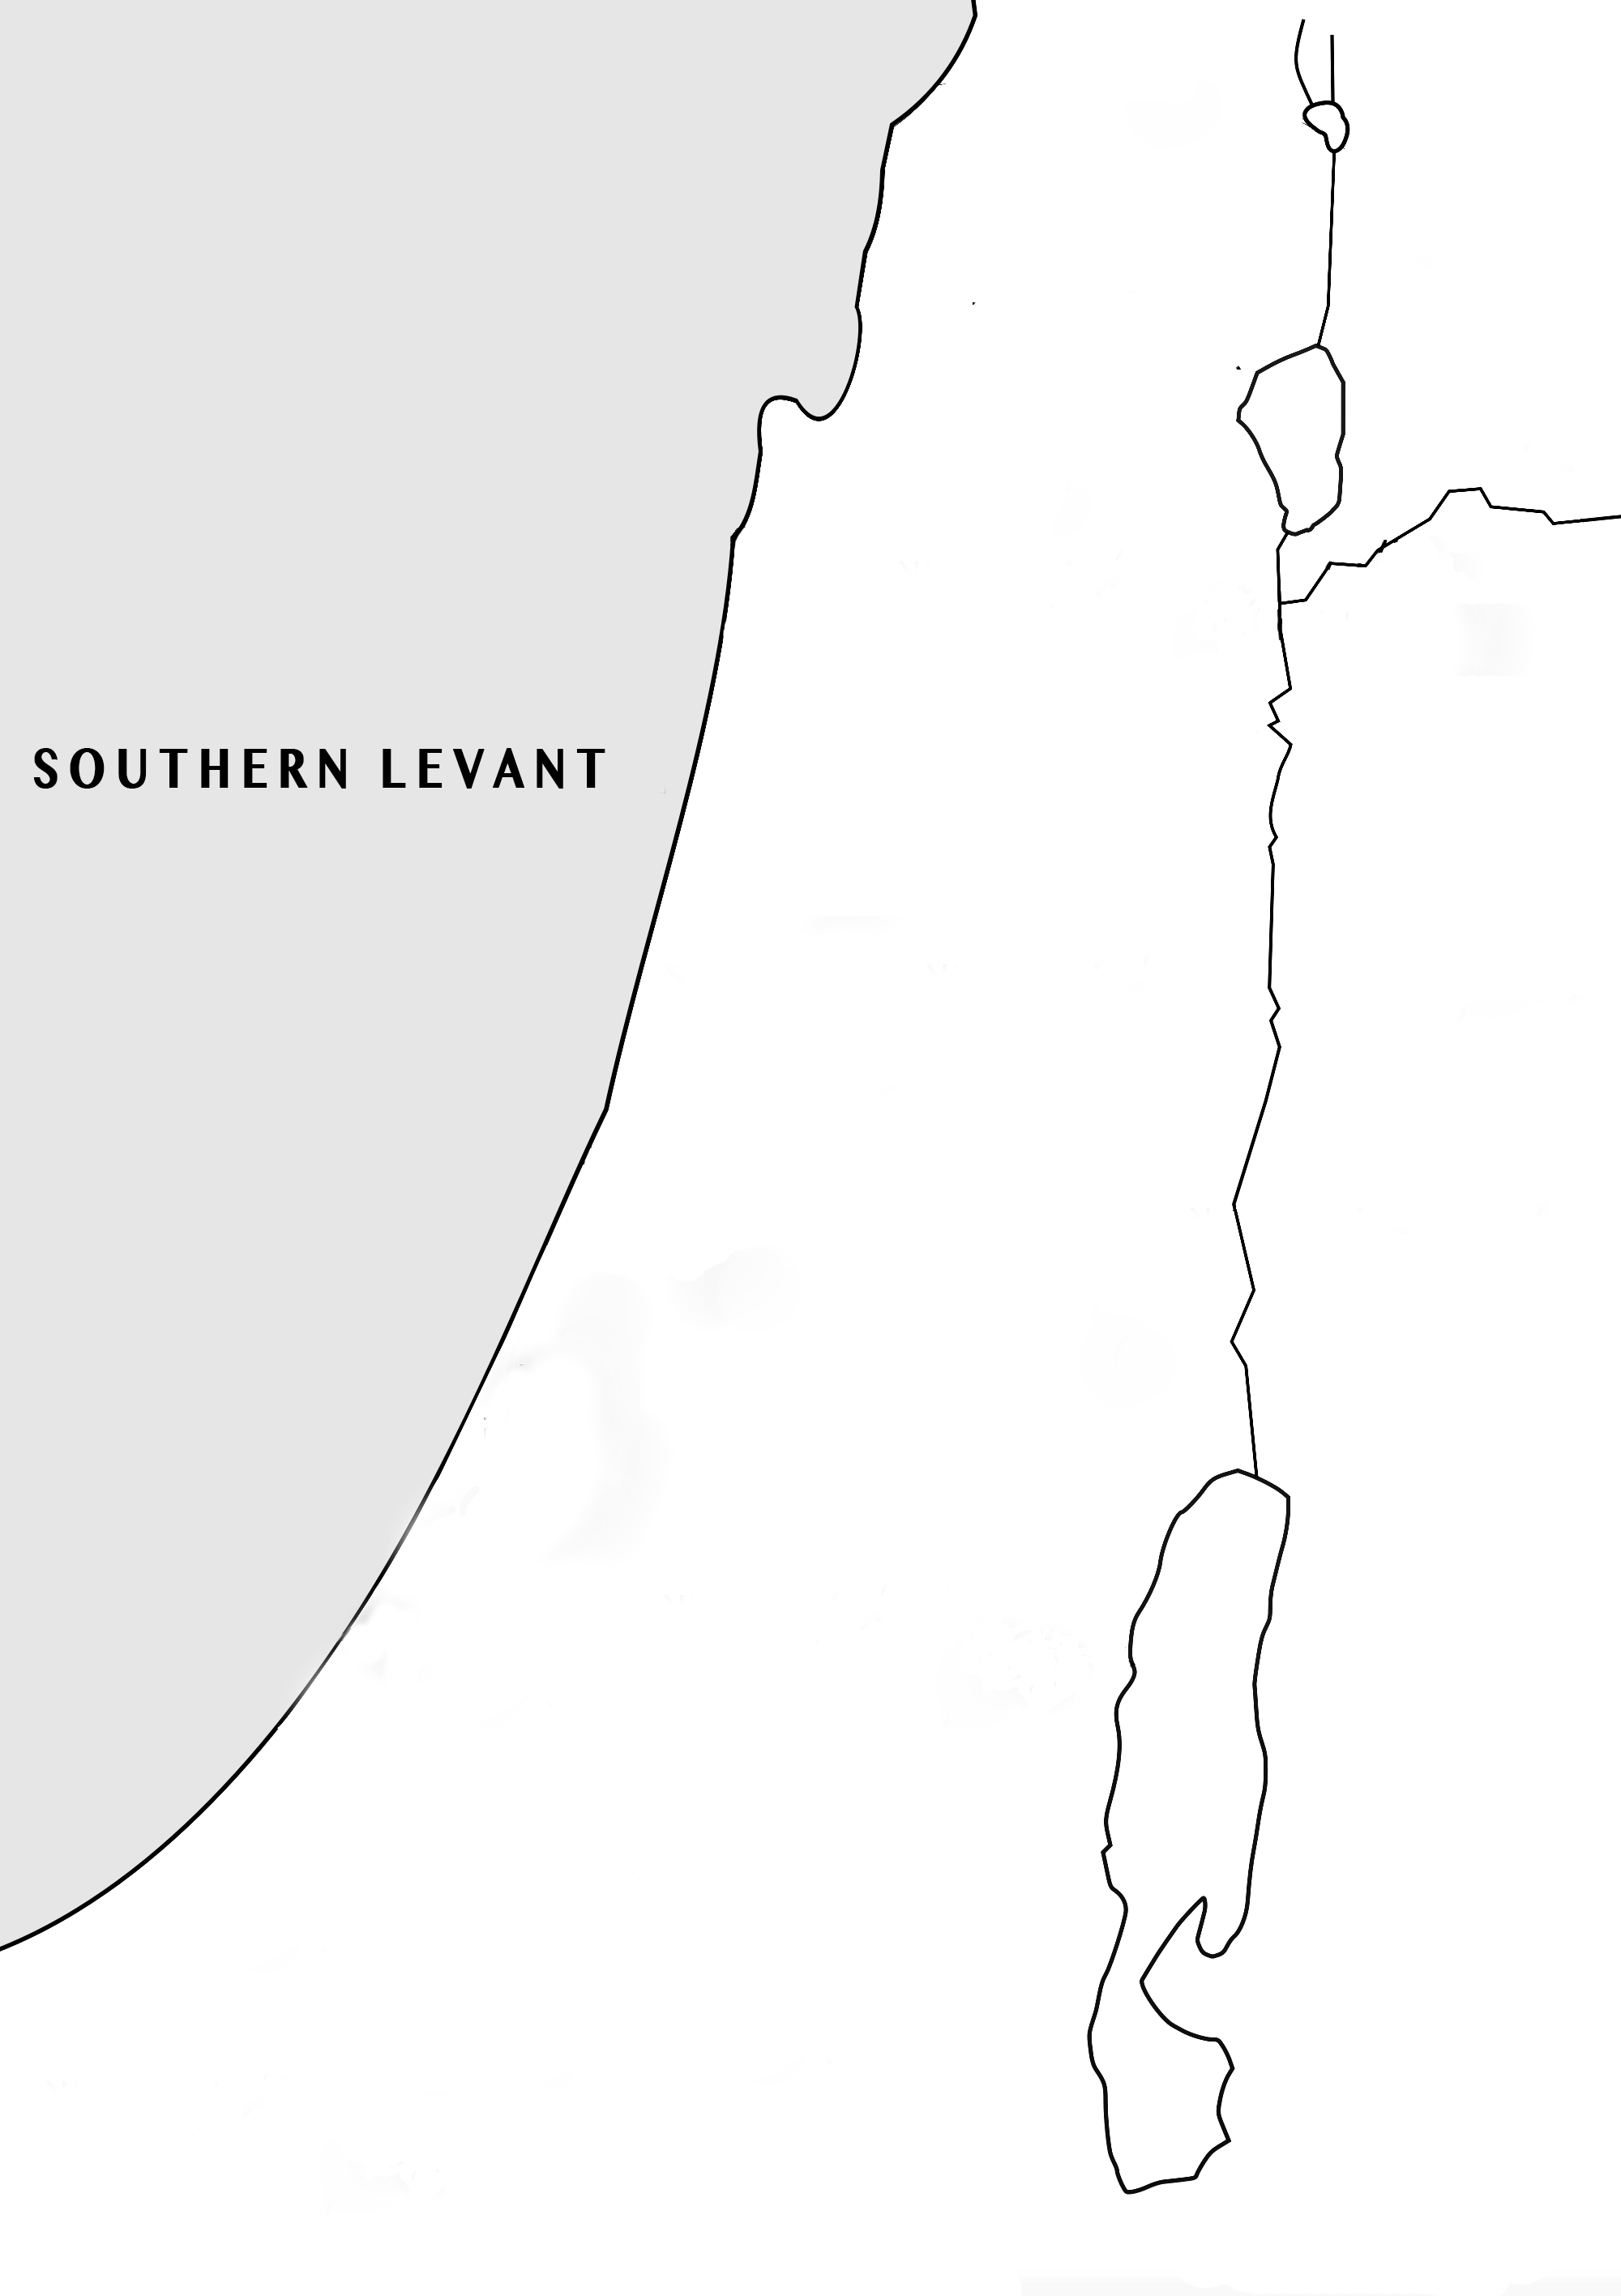 Southern Levant